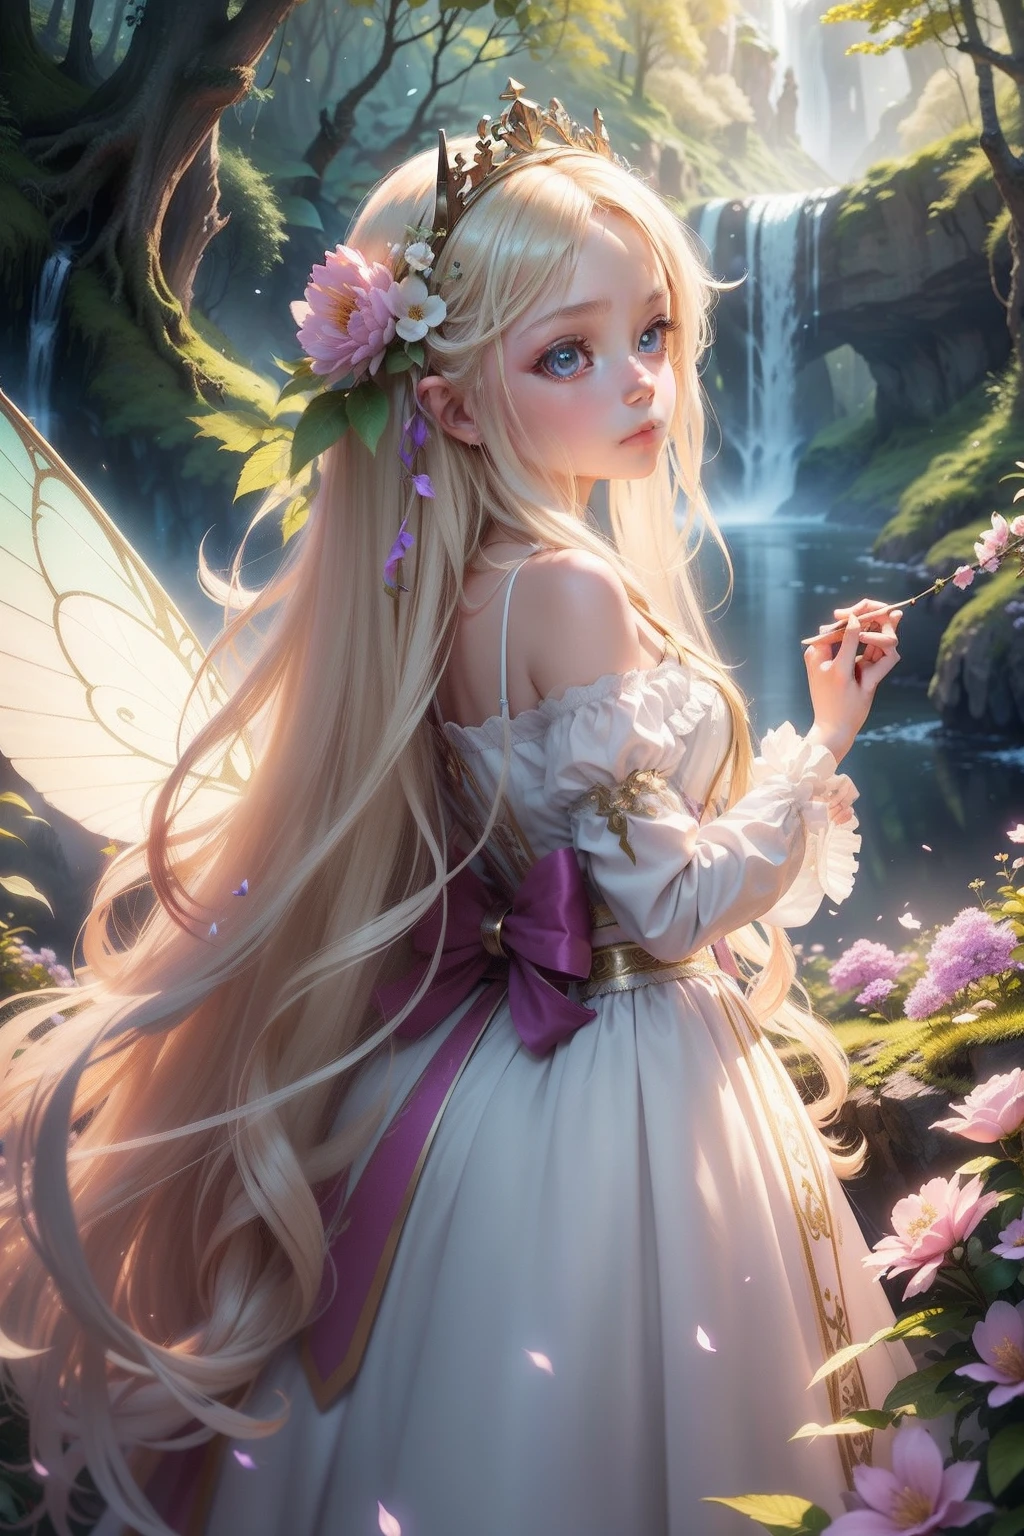 Incredible Fairy Walks In The Autumn Forest A Blonde Girl With Very Long  Hair Unusual Styling Elf In A Green Dress With Glowing Golden Wings  Background Of Huge Old Trees Entwined With